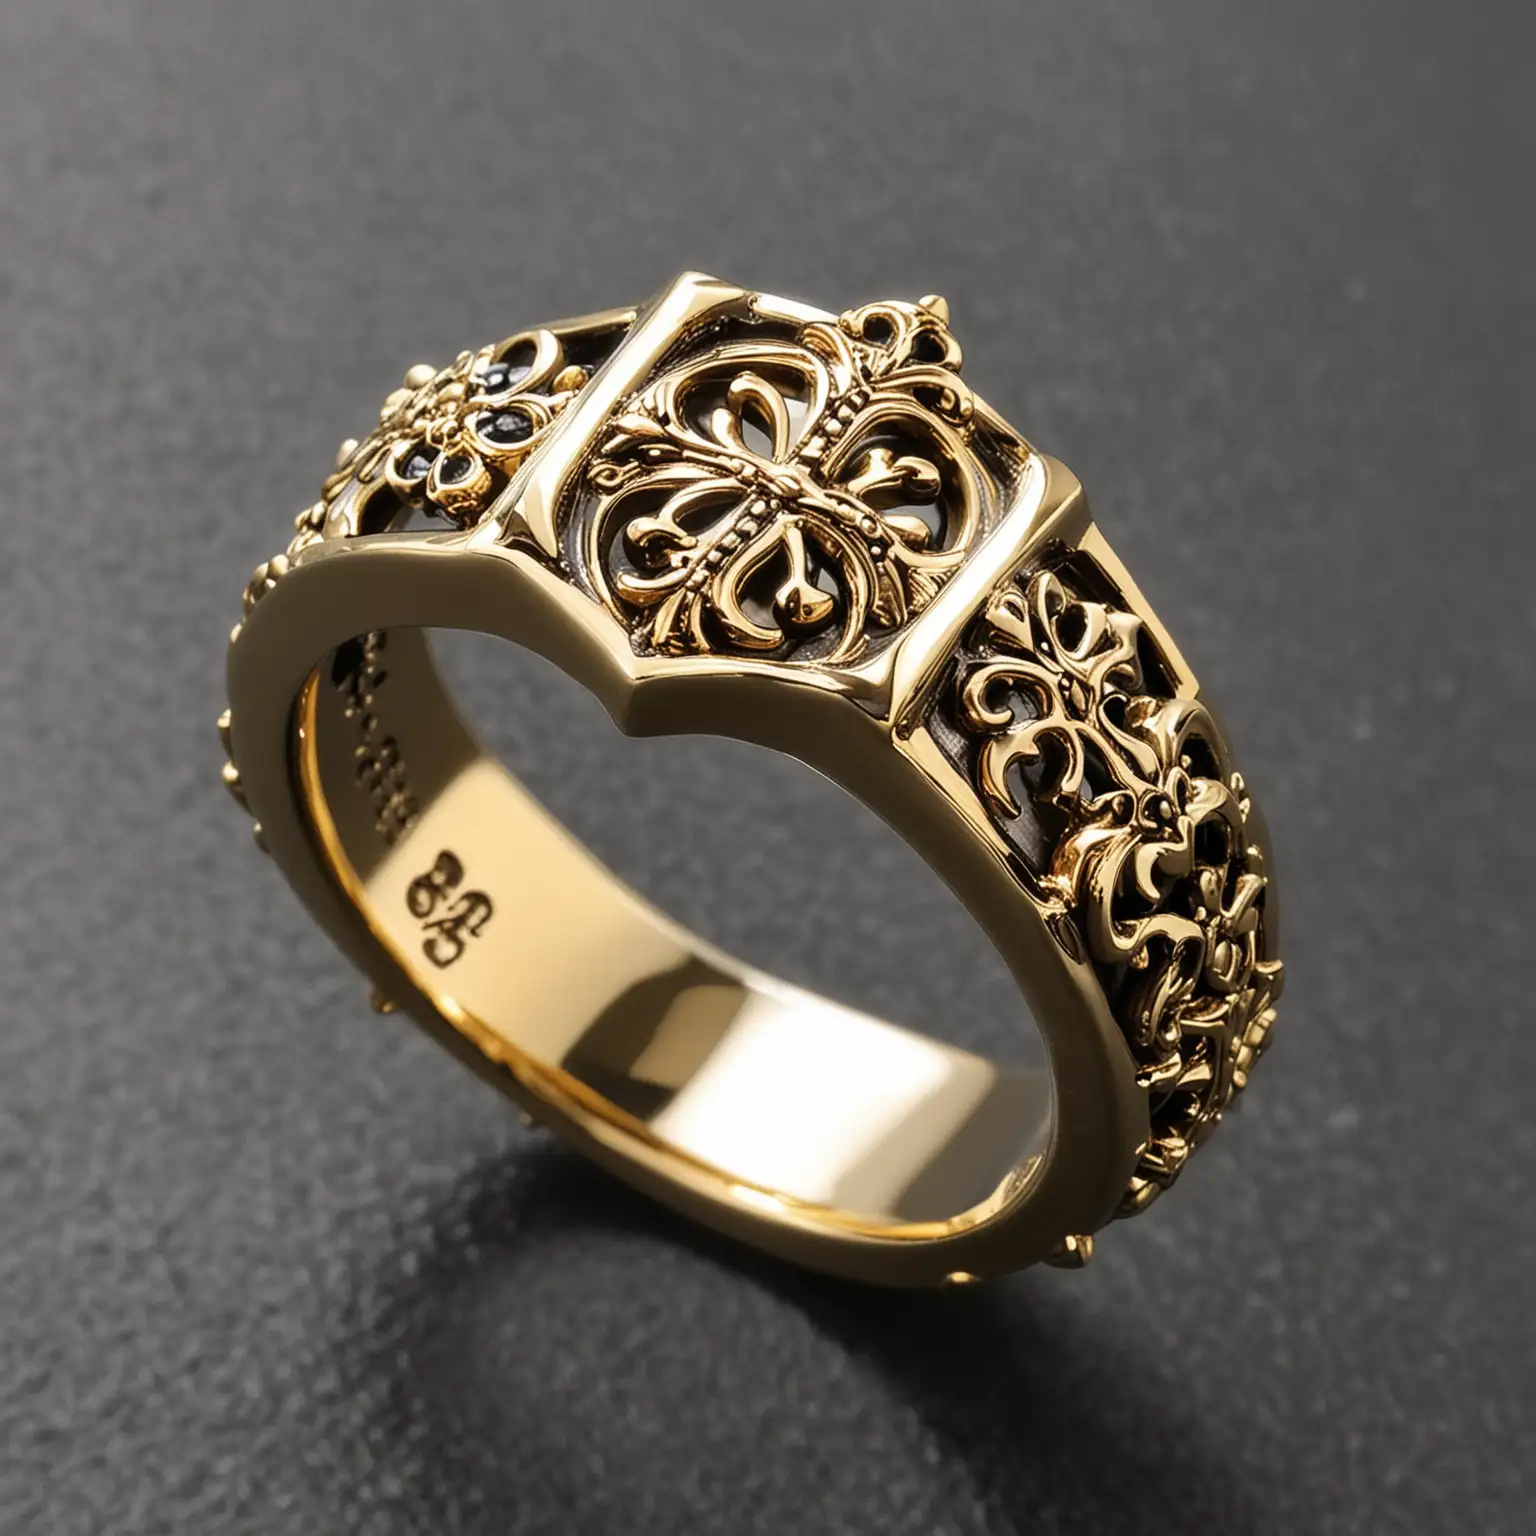 Luxurious Gold Gothic Chrome Hearts Styled Ring